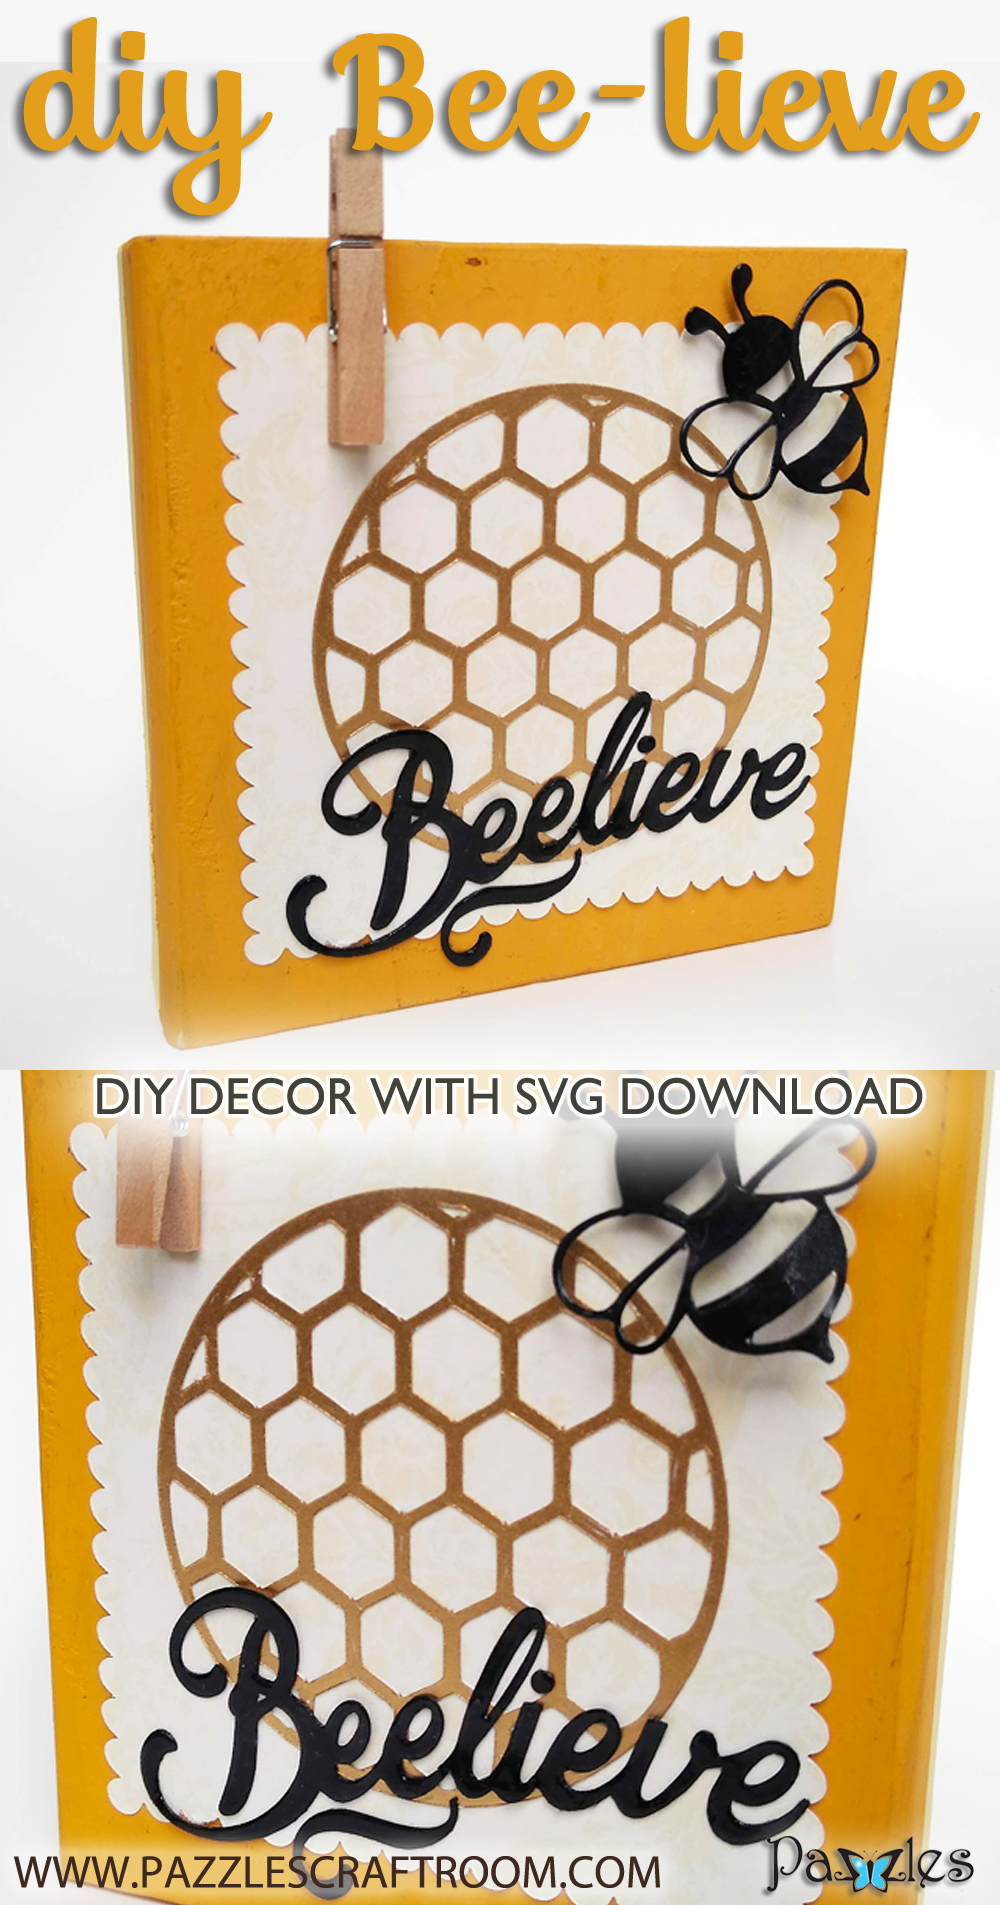 Pazzles DIY Bee-lieve Decorative Block with instant SVG download. Compatible with all major electronic cutters including Pazzles Inspiration, Cricut, and Silhouette Cameo. Design by Renee Smart.